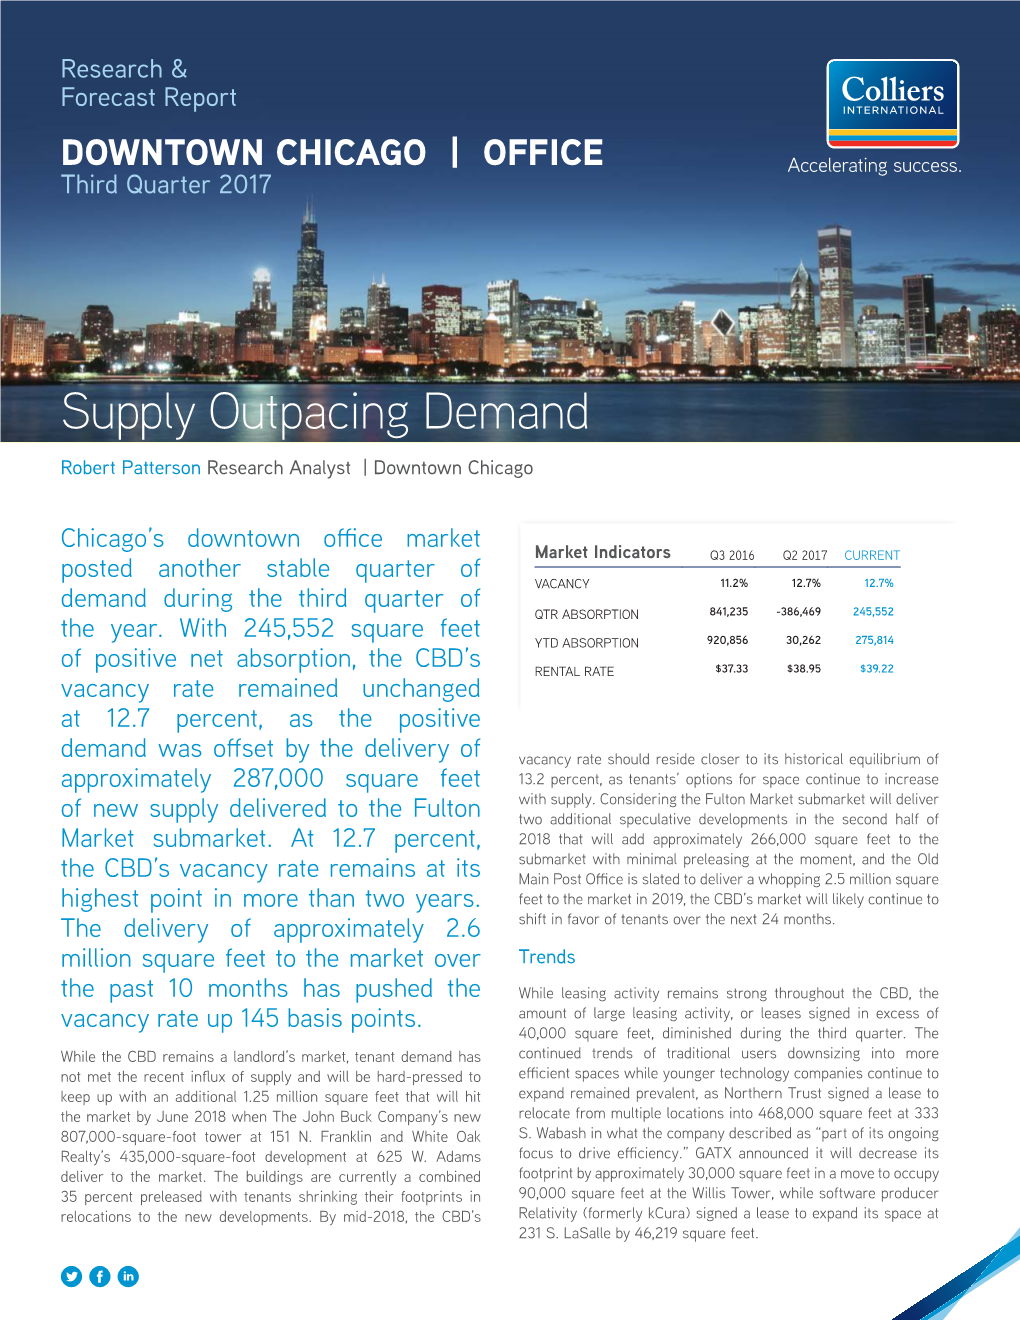 Supply Outpacing Demand Robert Patterson Research Analyst | Downtown Chicago